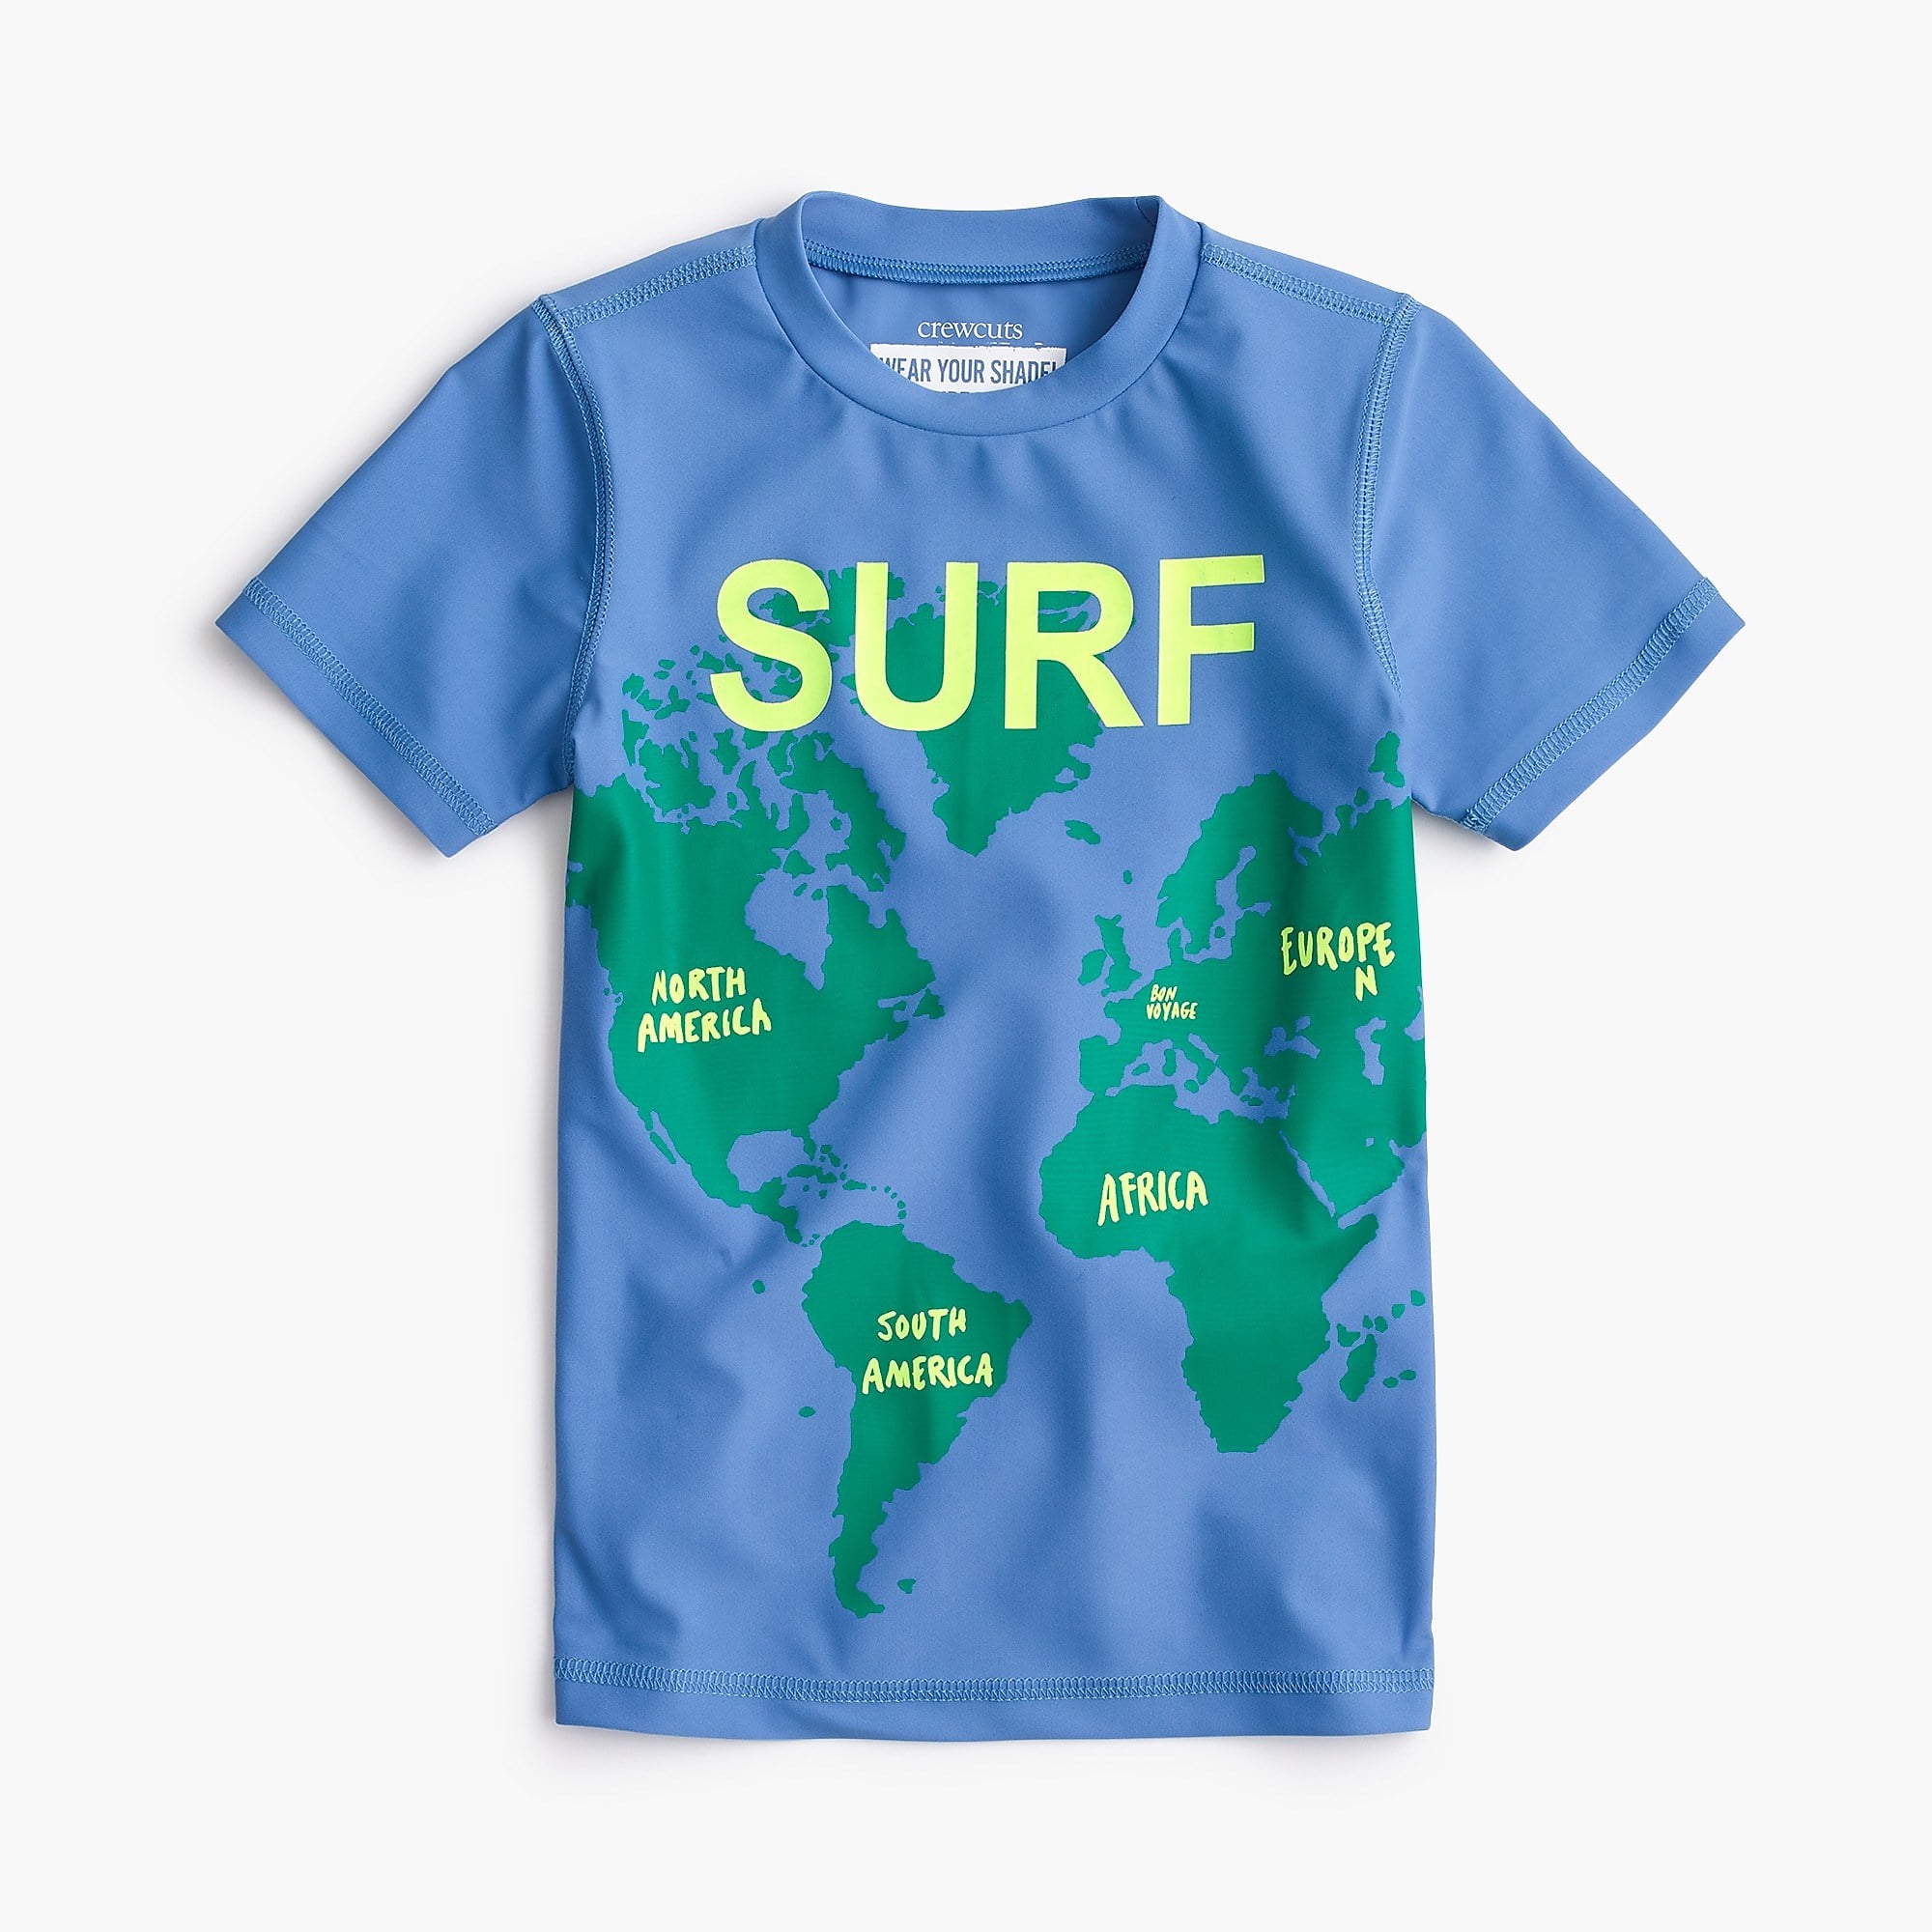 J Crew Surf The World Rashguard 25 Adorable Kid Swimsuits That Are On Sale Right Now Popsugar Family Photo 21